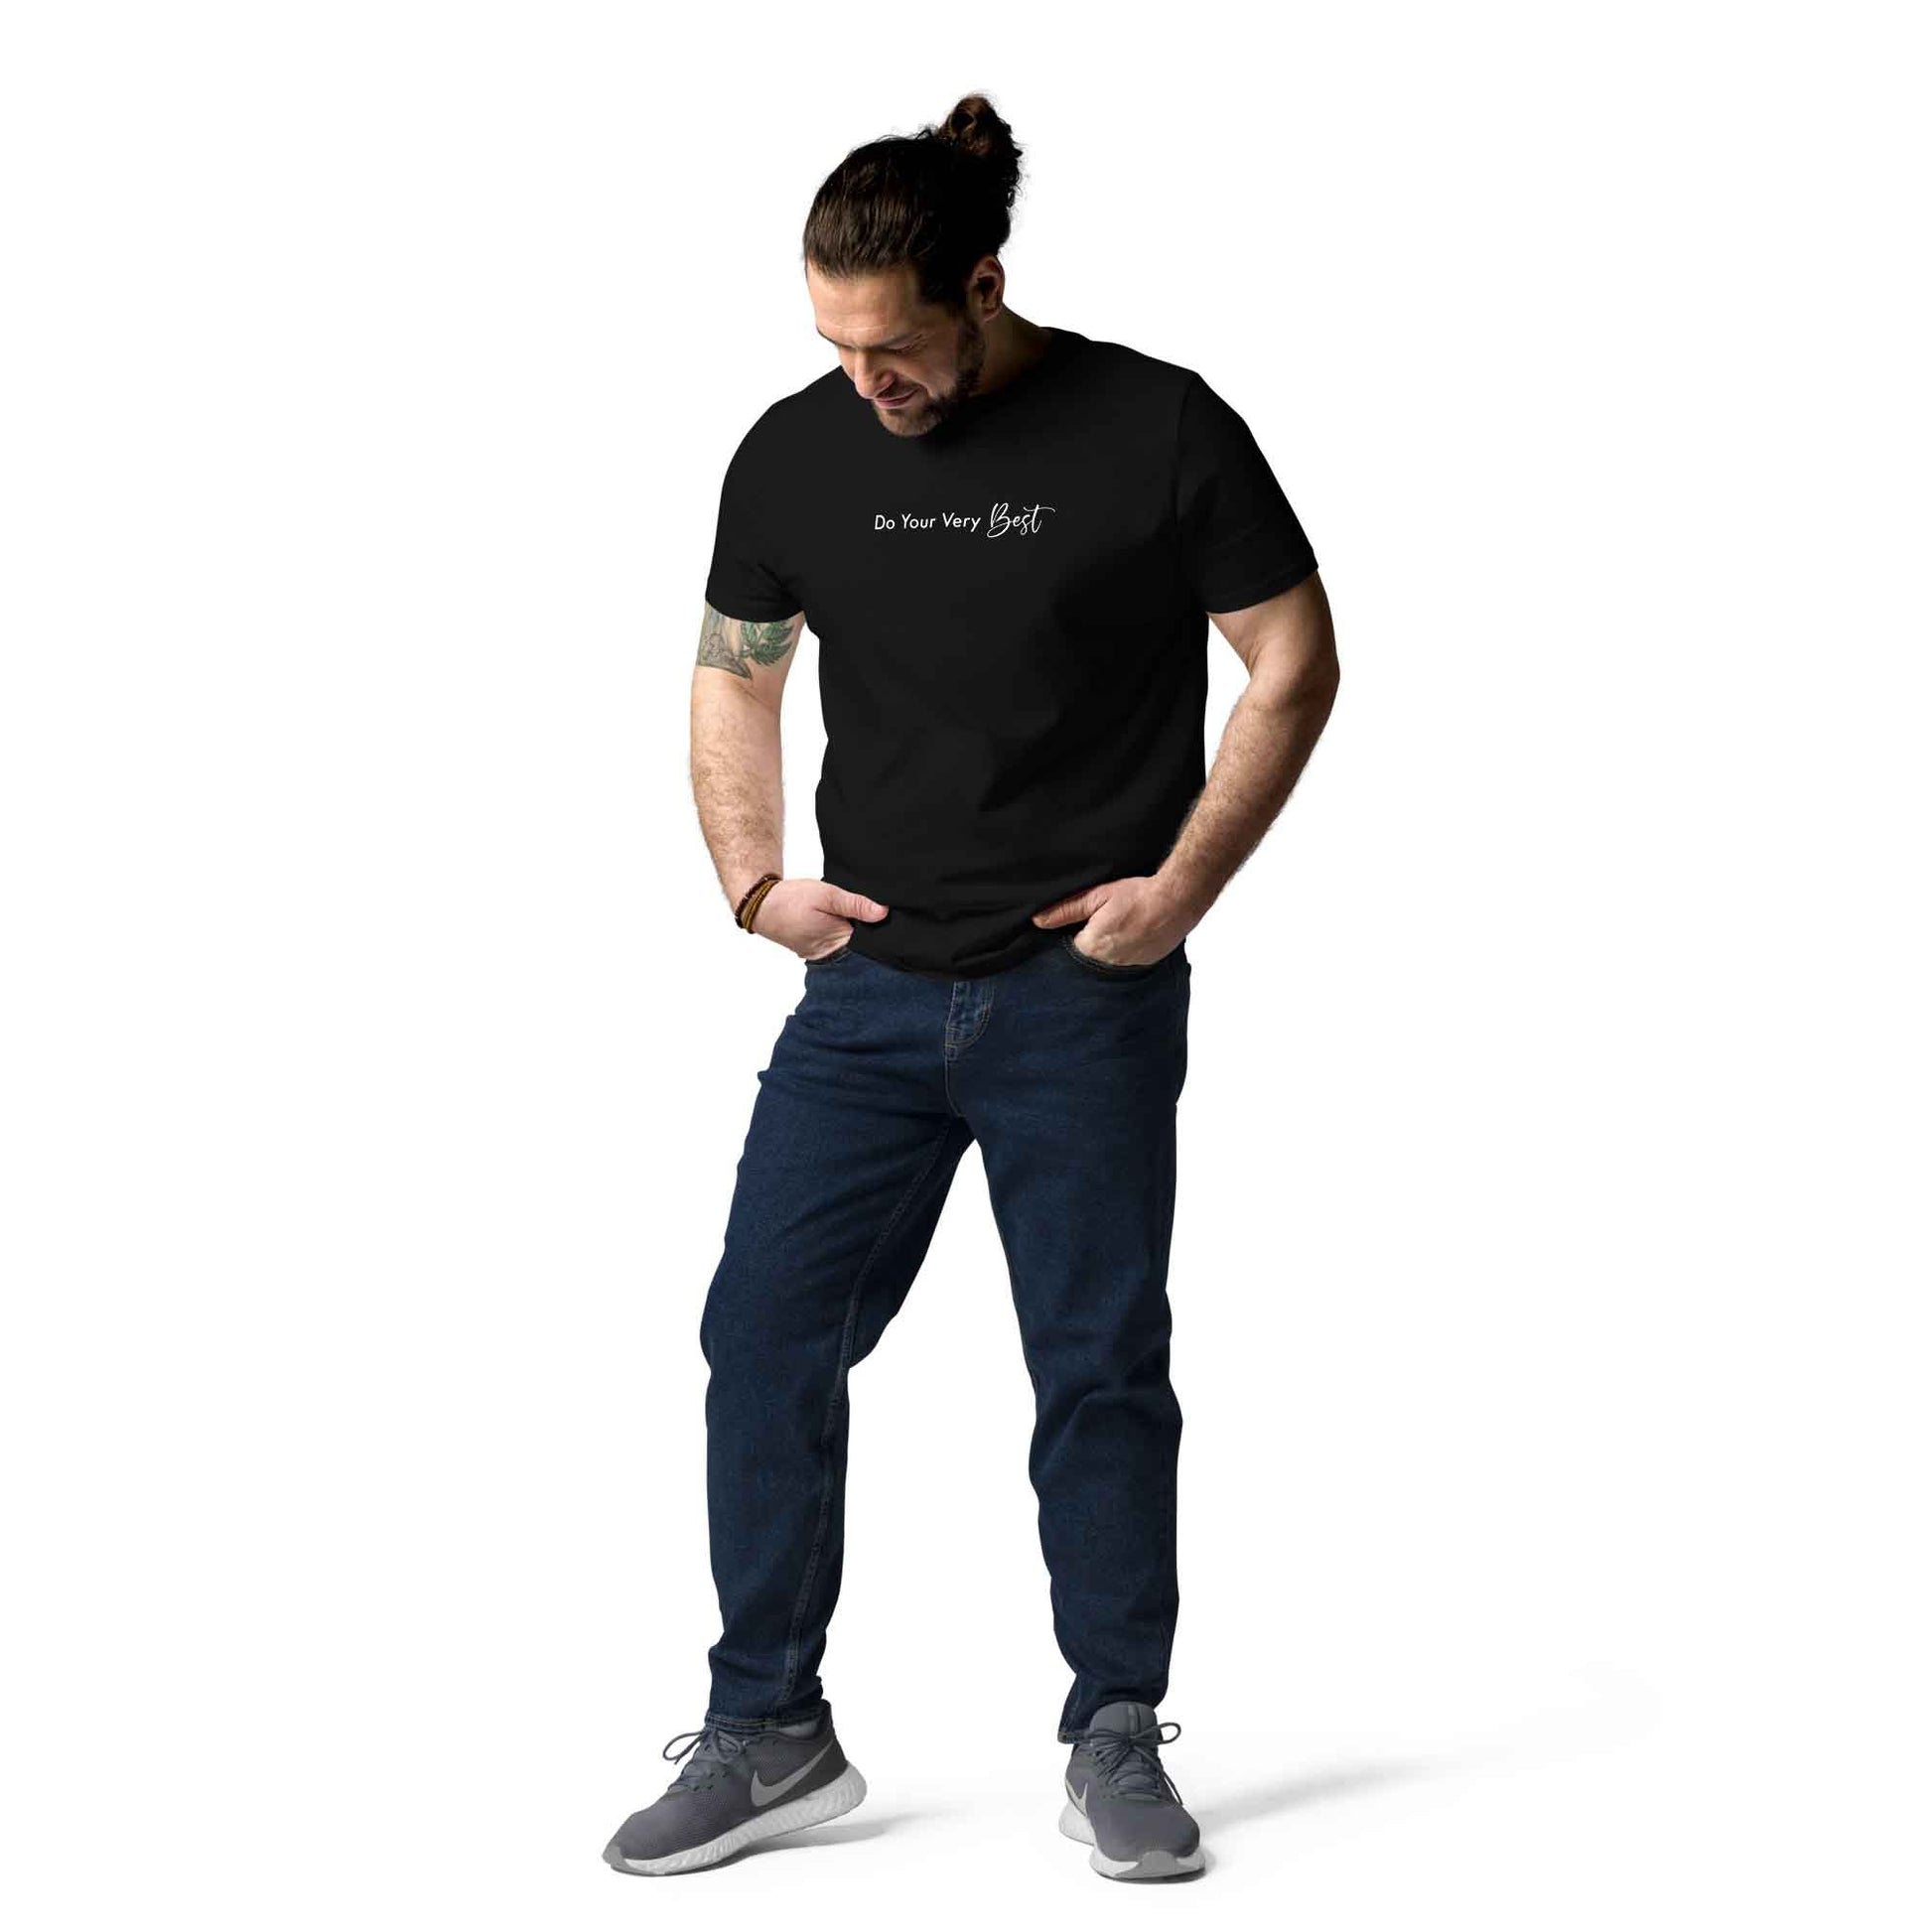 Men black inspirational t-shirt with motivational quote, "Do Your Very Best."